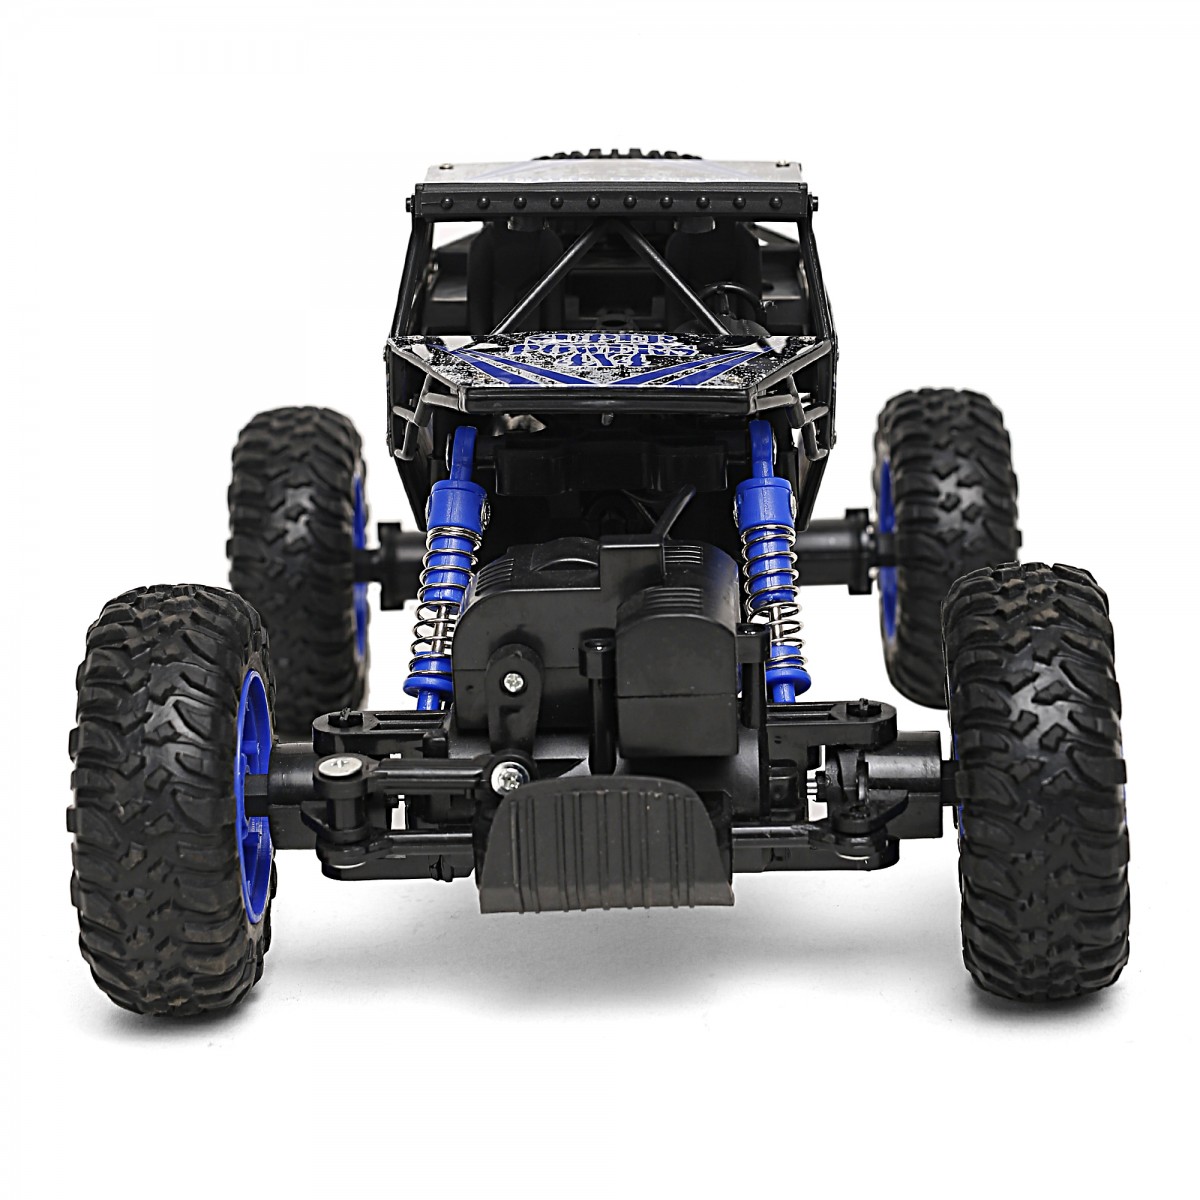 Ralleyz 1:18 Off Road Rc Car With 2.4 Ghz Remote Control 3.7V Rechargeable Battery Blue 4Y+